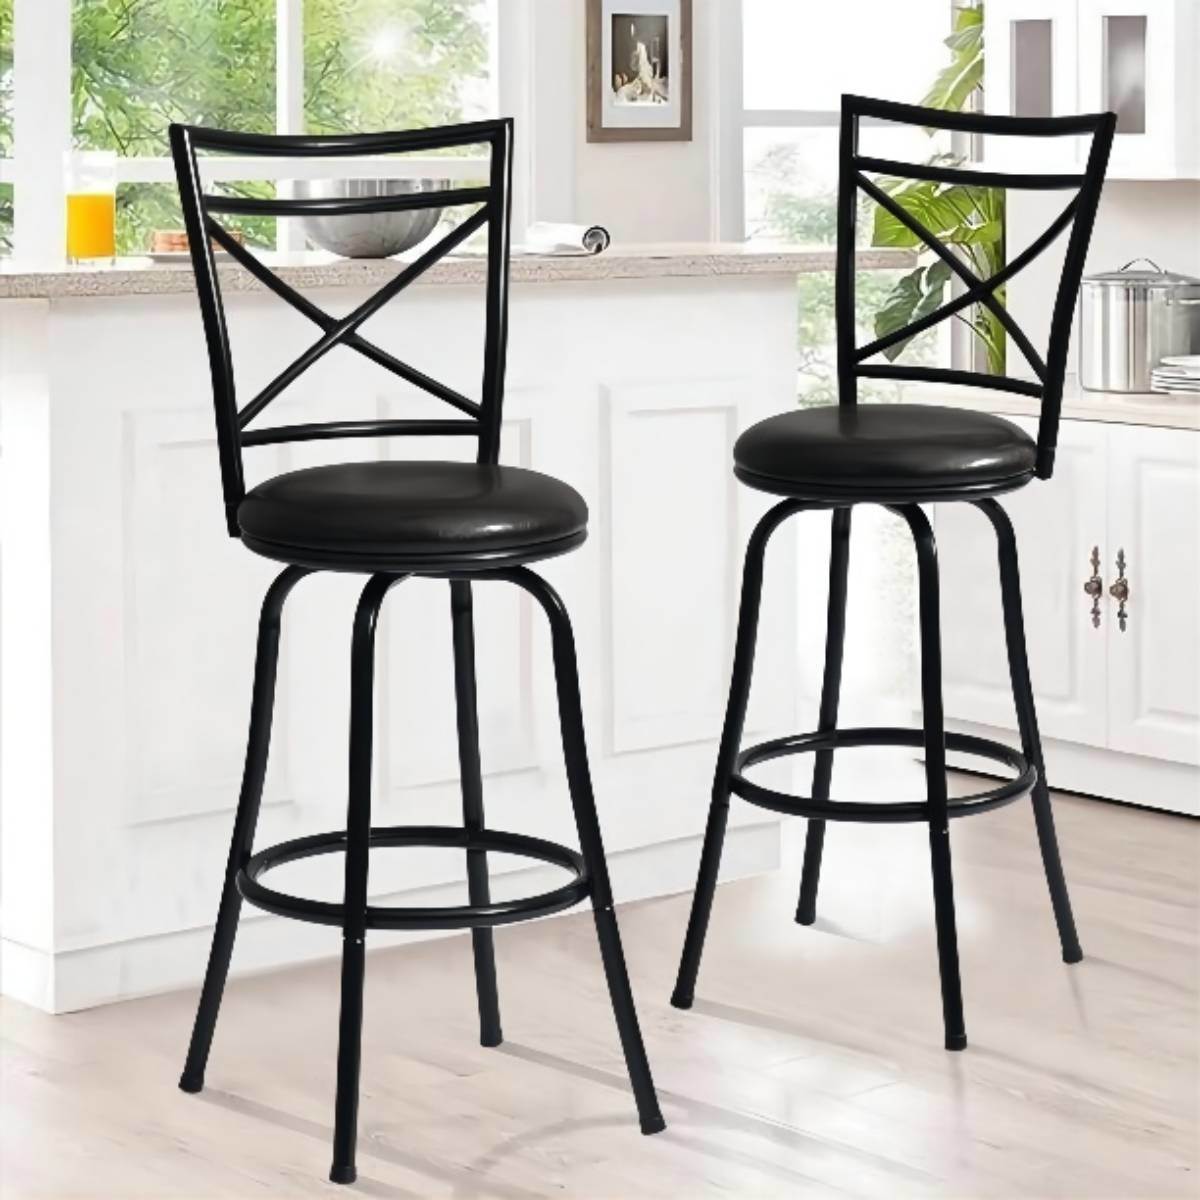 Two Vintage Industrial Counter Height Bar Stools Set of 2, Swivel Barstools with Metal Back for Kitchen Island, 26 Inch Height Round Seat in a kitchen.